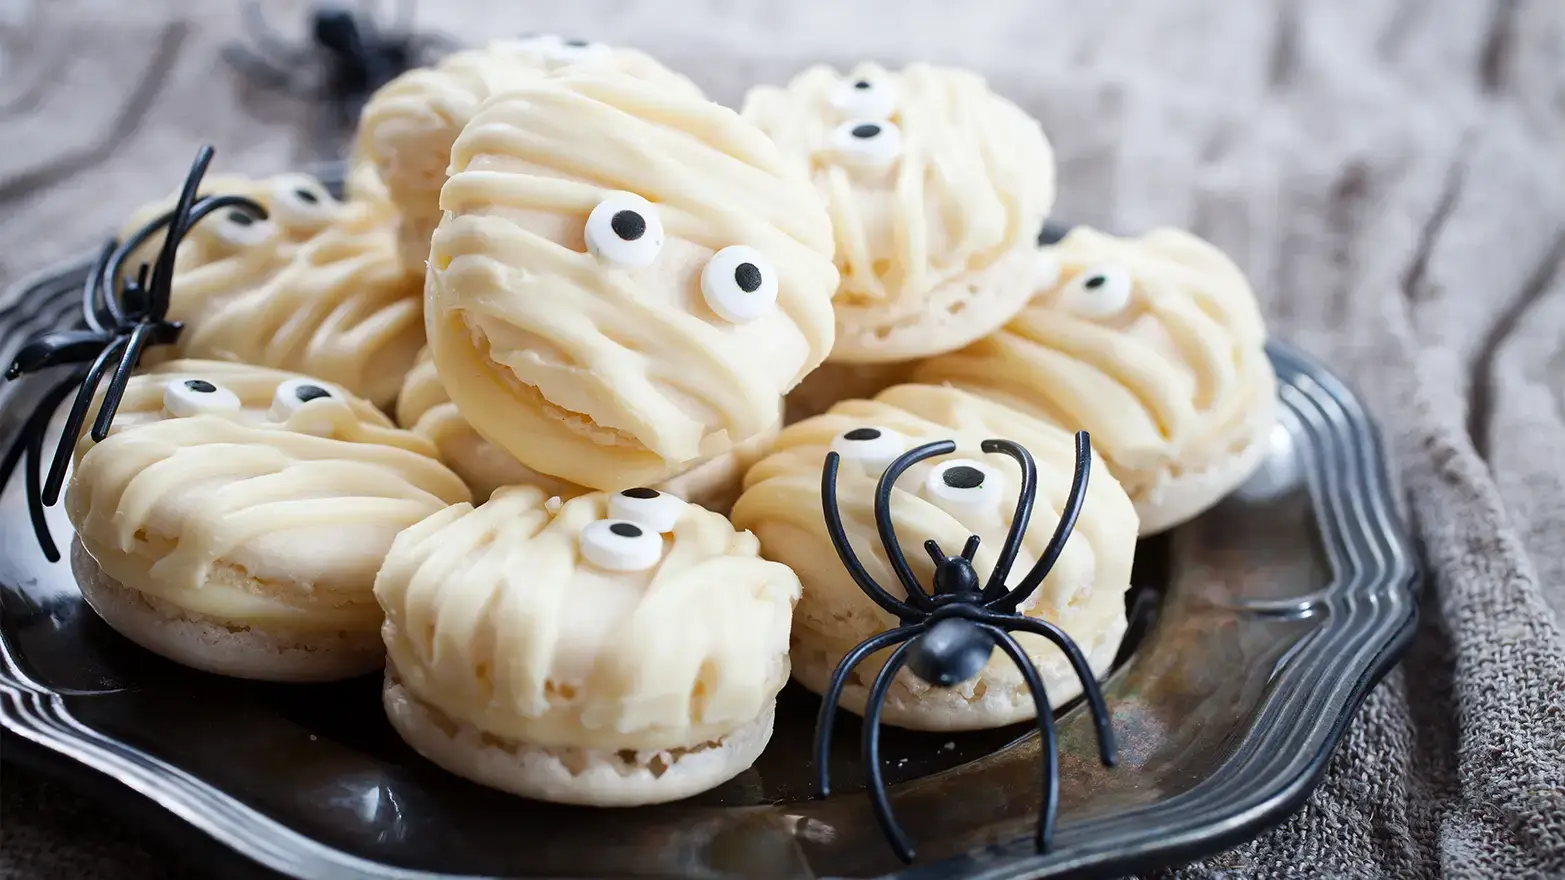 macarons decorated to look like mummies with white chocolate drizzle